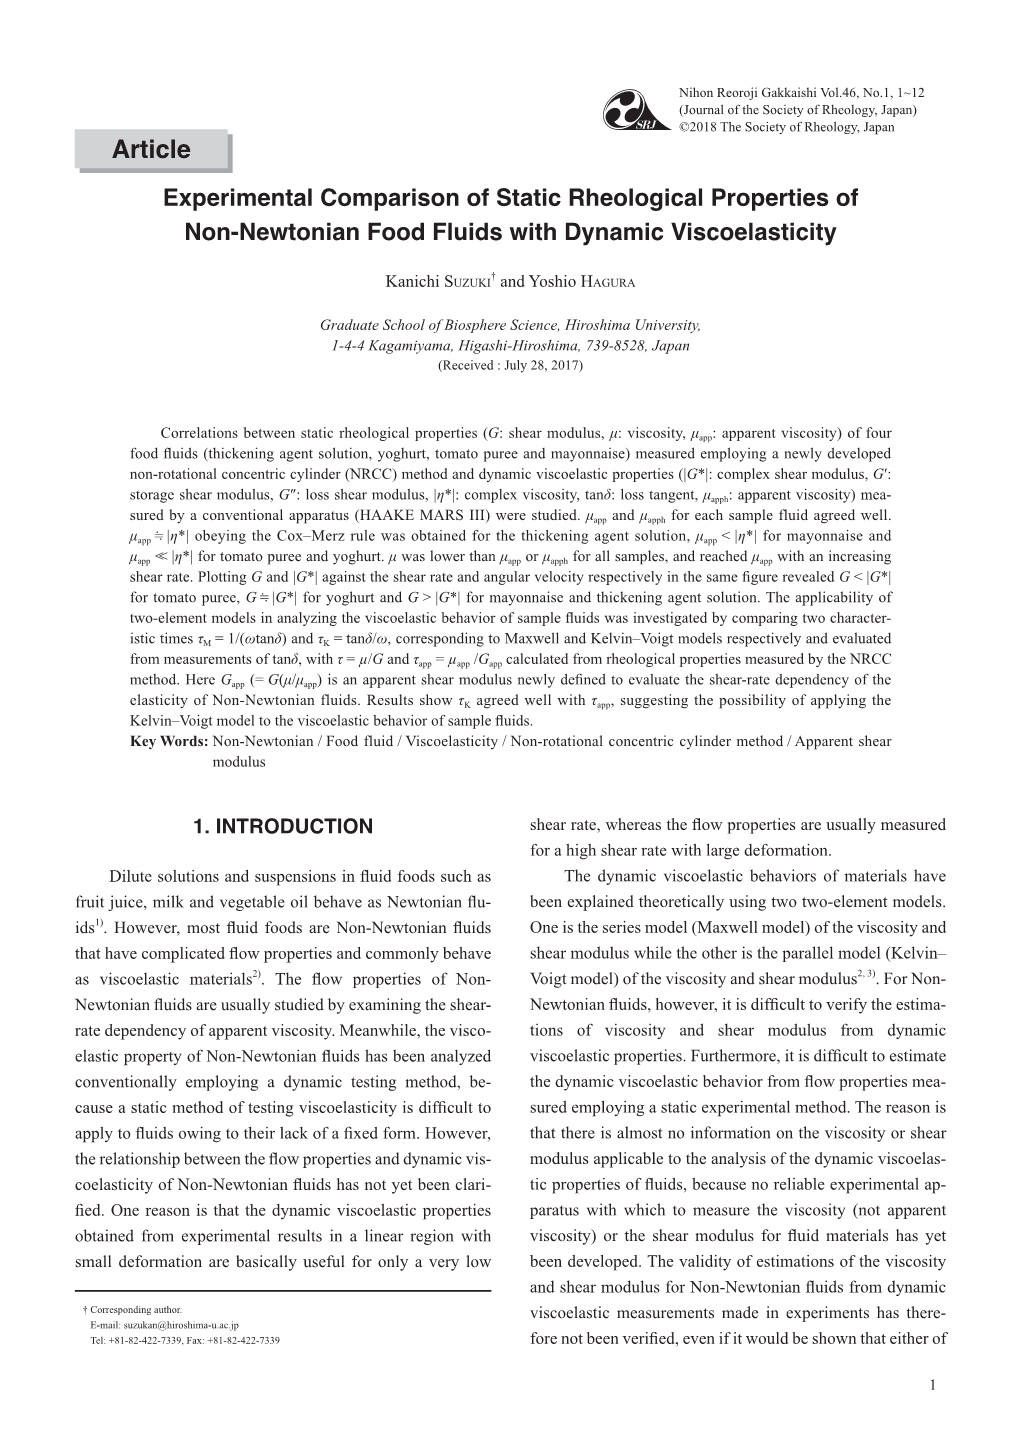 Article Experimental Comparison of Static Rheological Properties of Non-Newtonian Food Fluids with Dynamic Viscoelasticity